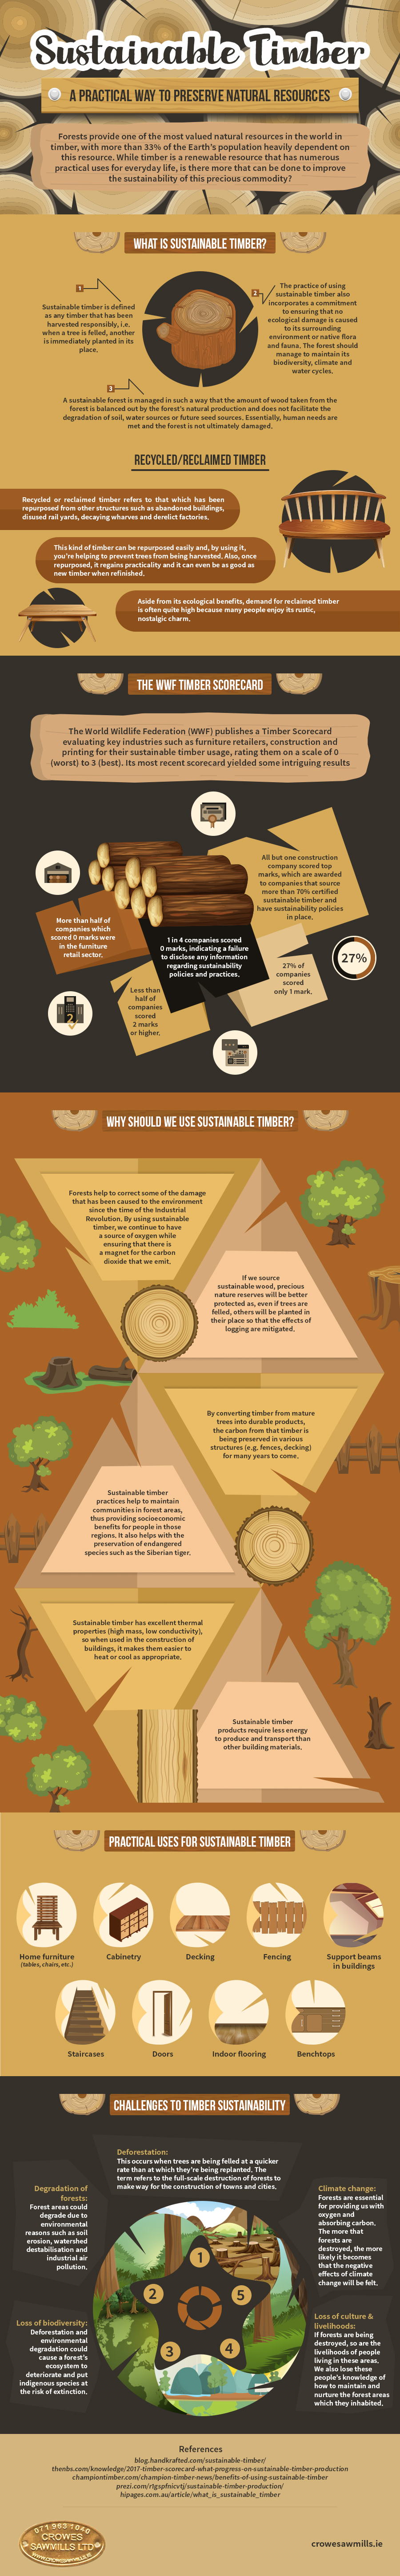 Sustainable Timber- A practical way to preserve Natural Resources(Infographic)